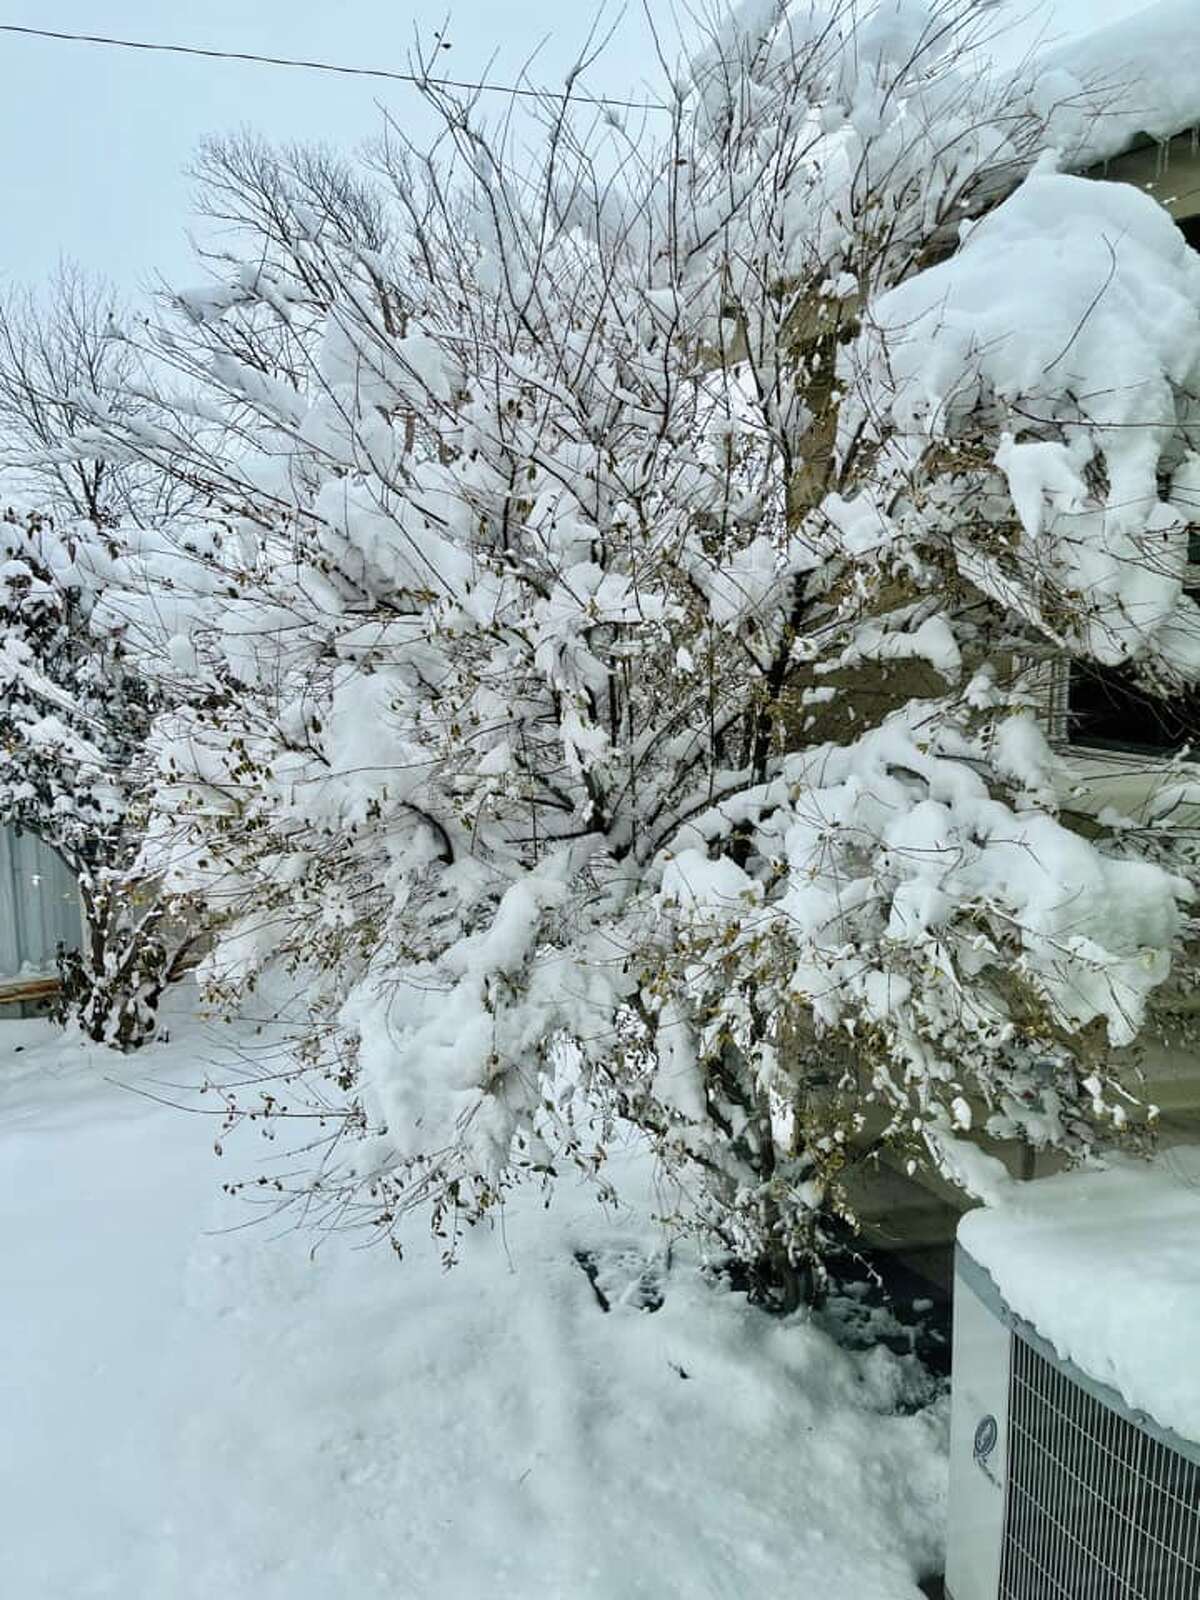 Here are some reader-submitted photos of the snowfall from Jan. 25, 2023.